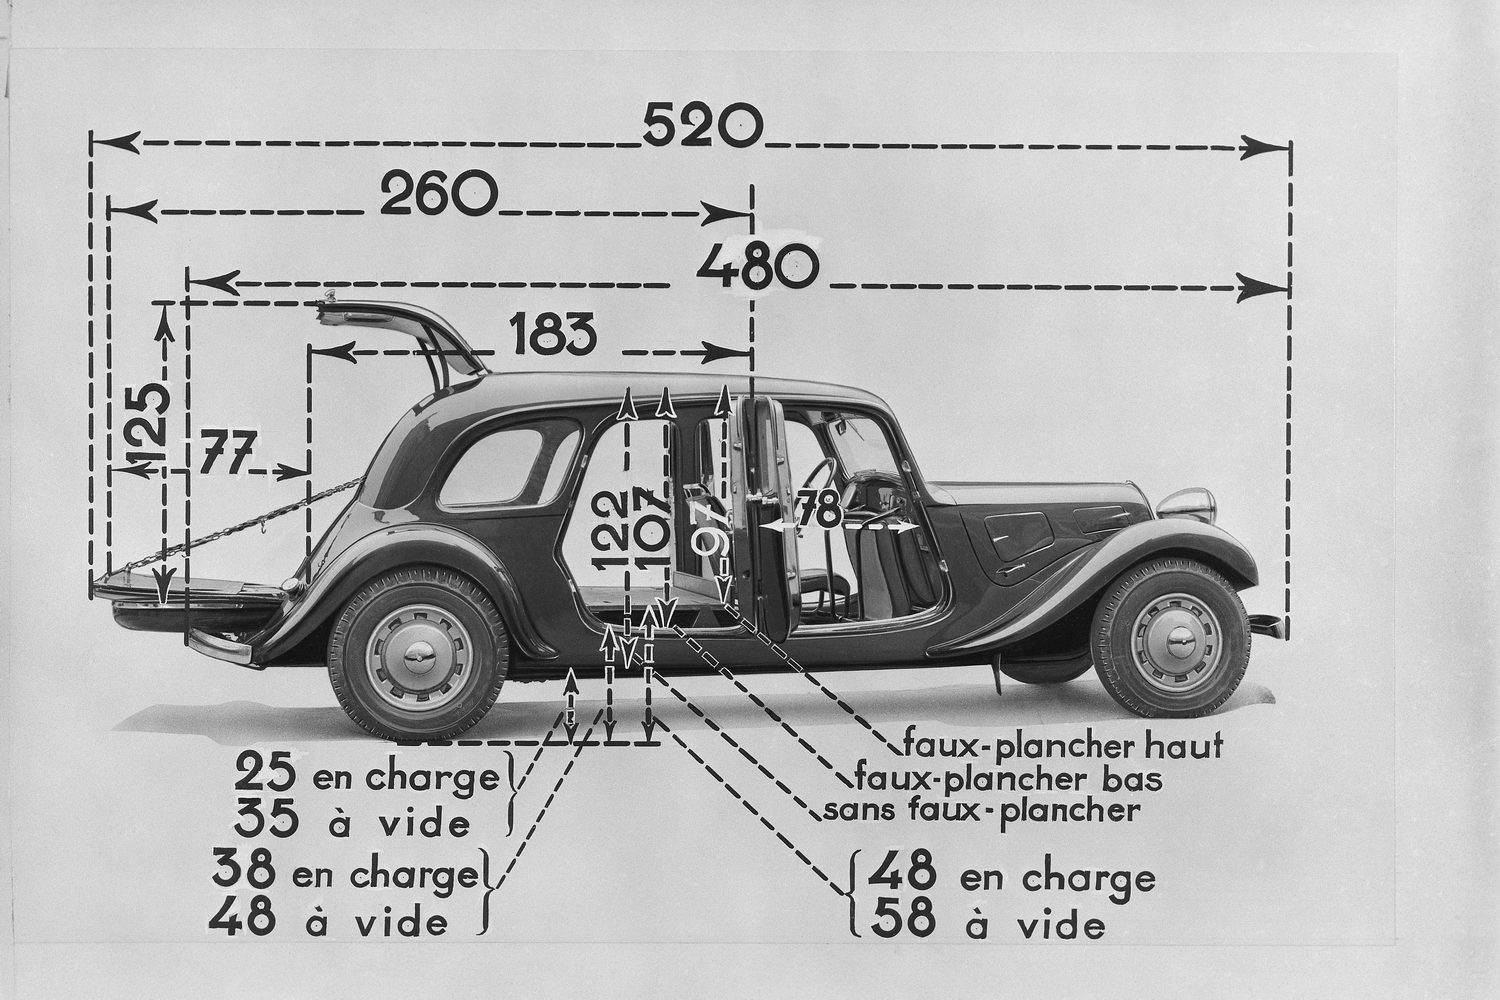 Complete Car Features | Citroën's history of innovation